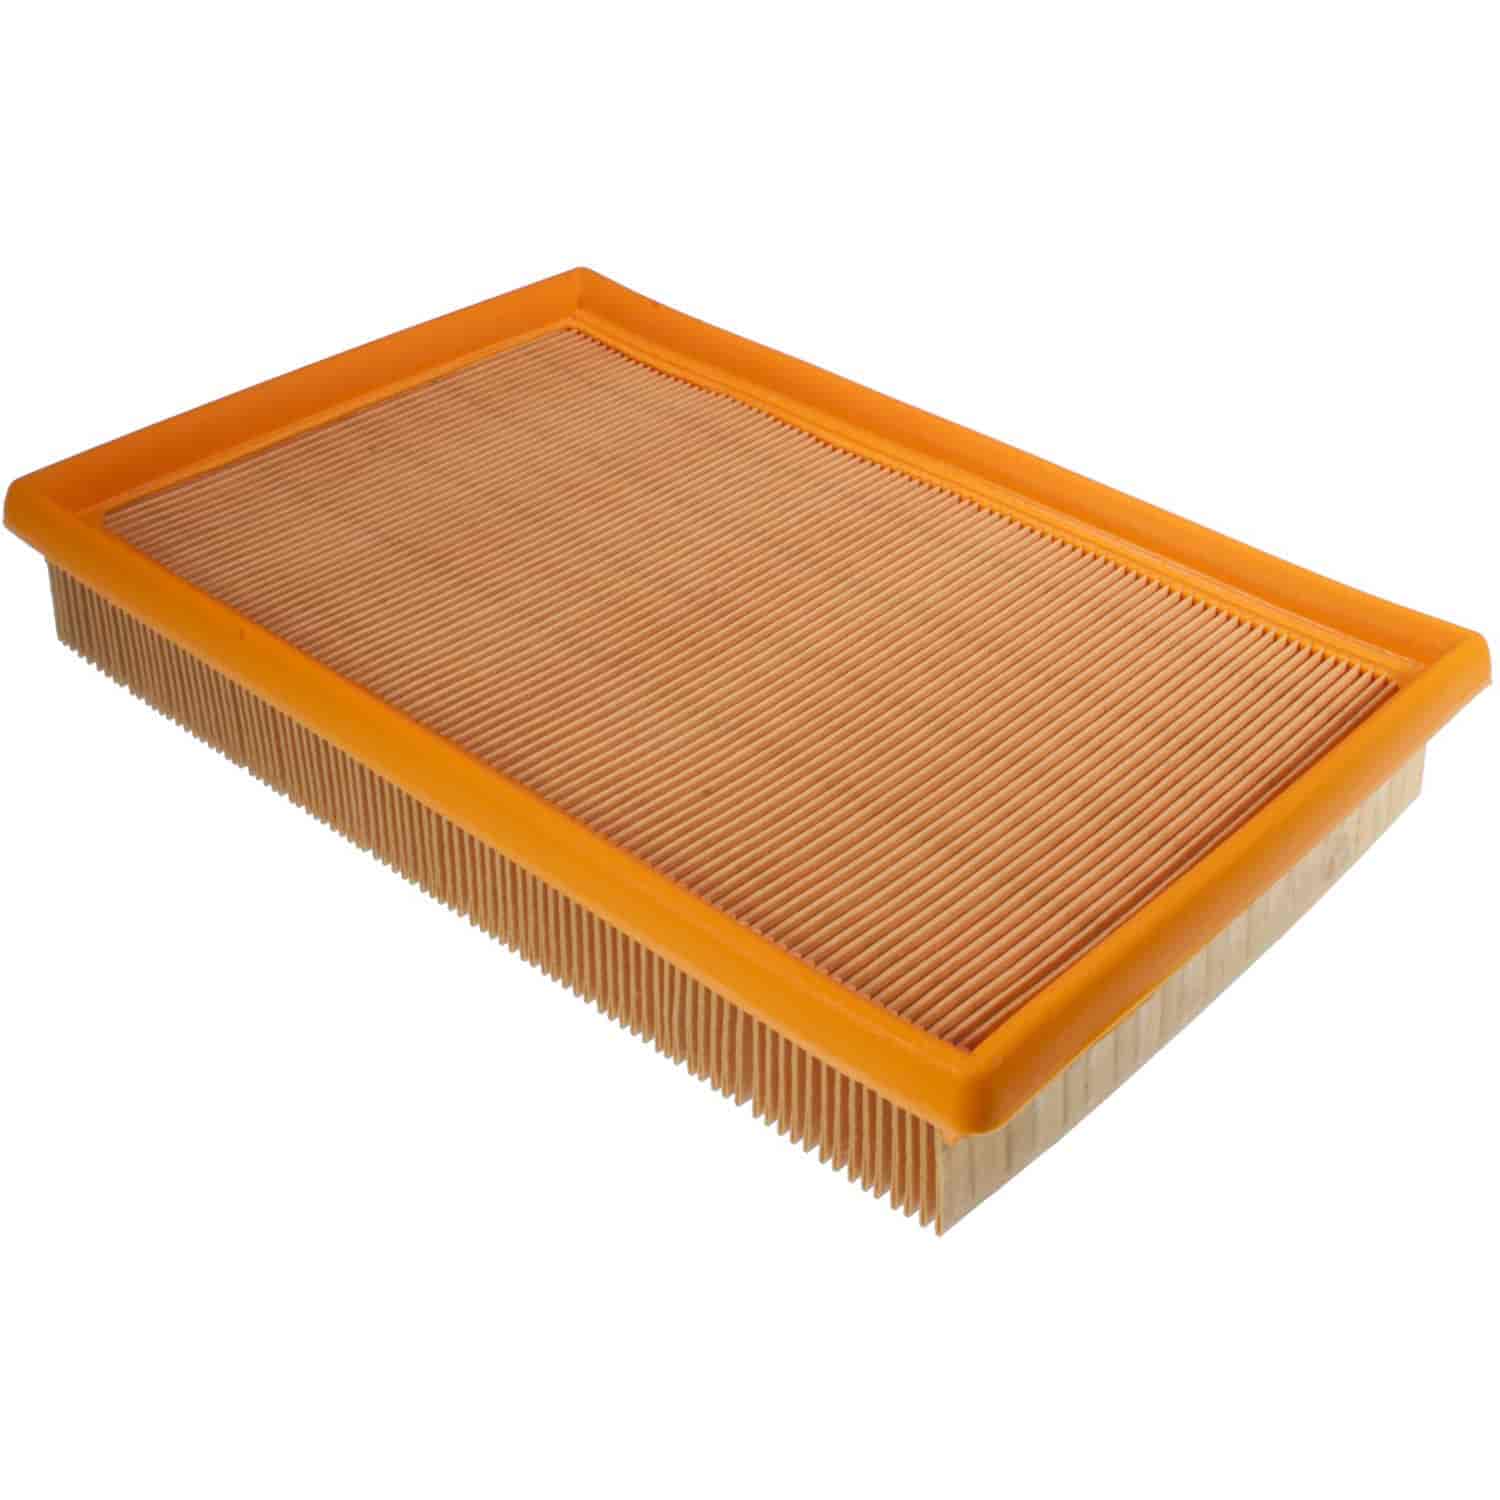 Mahle Air Filter Mercury Villager 93-01 for Nissan